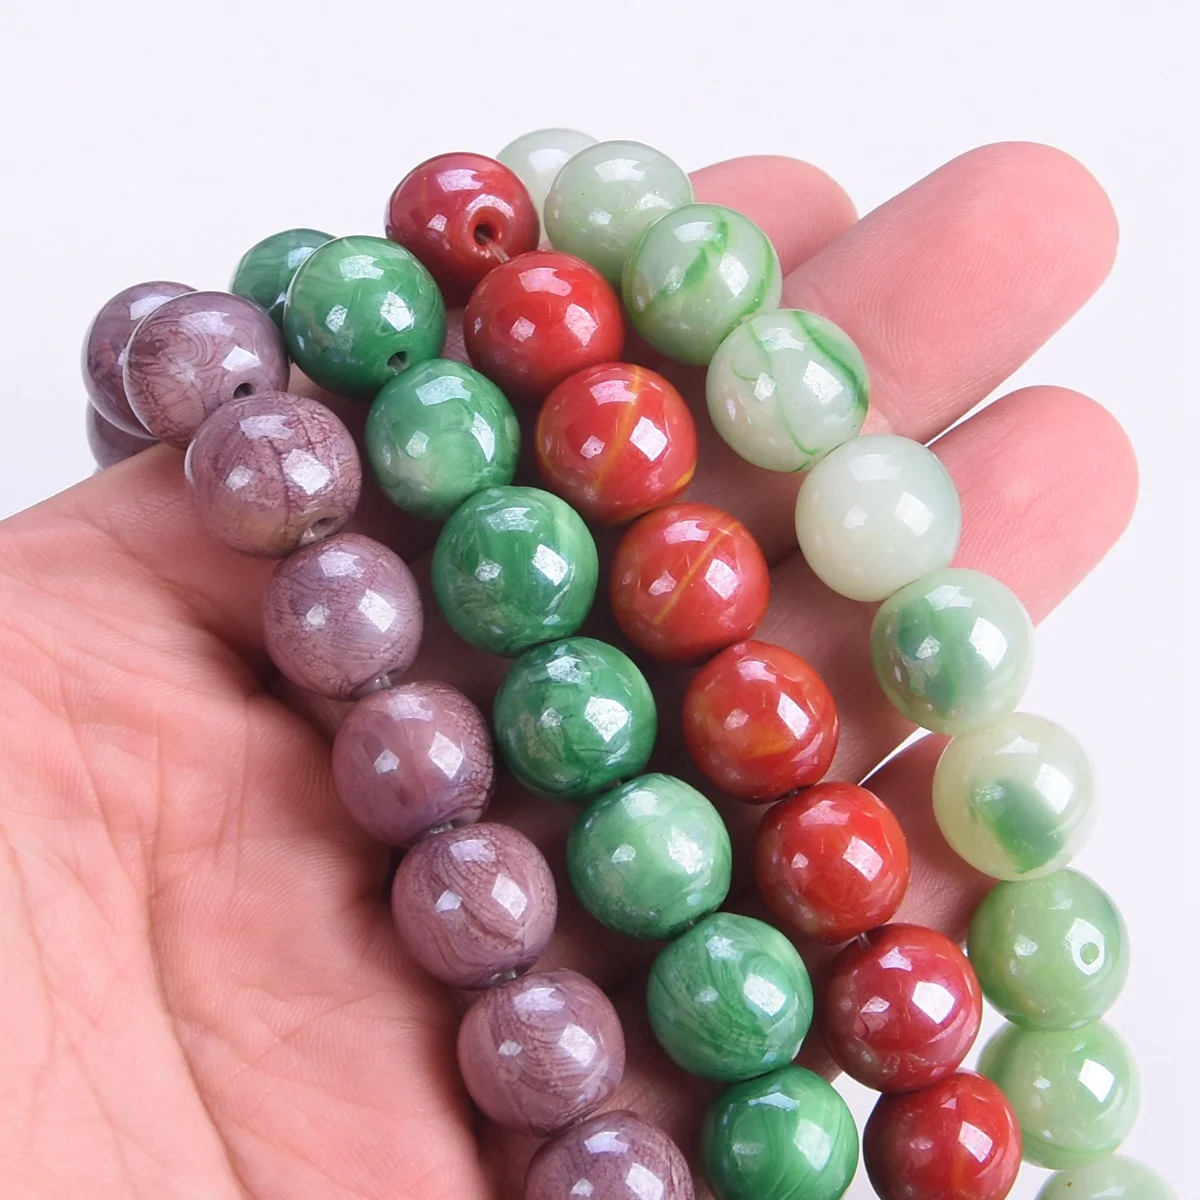 10pcs 14mm Round Jade Like Opaque Lampwork Glass Loose Crafts Beads For Jewelry Making DIY Bracelet Findings 10pcs 18x11mm mimosa leaf shape petal handmade lampwork glass loose pendants beads for jewelry making diy crafts findings